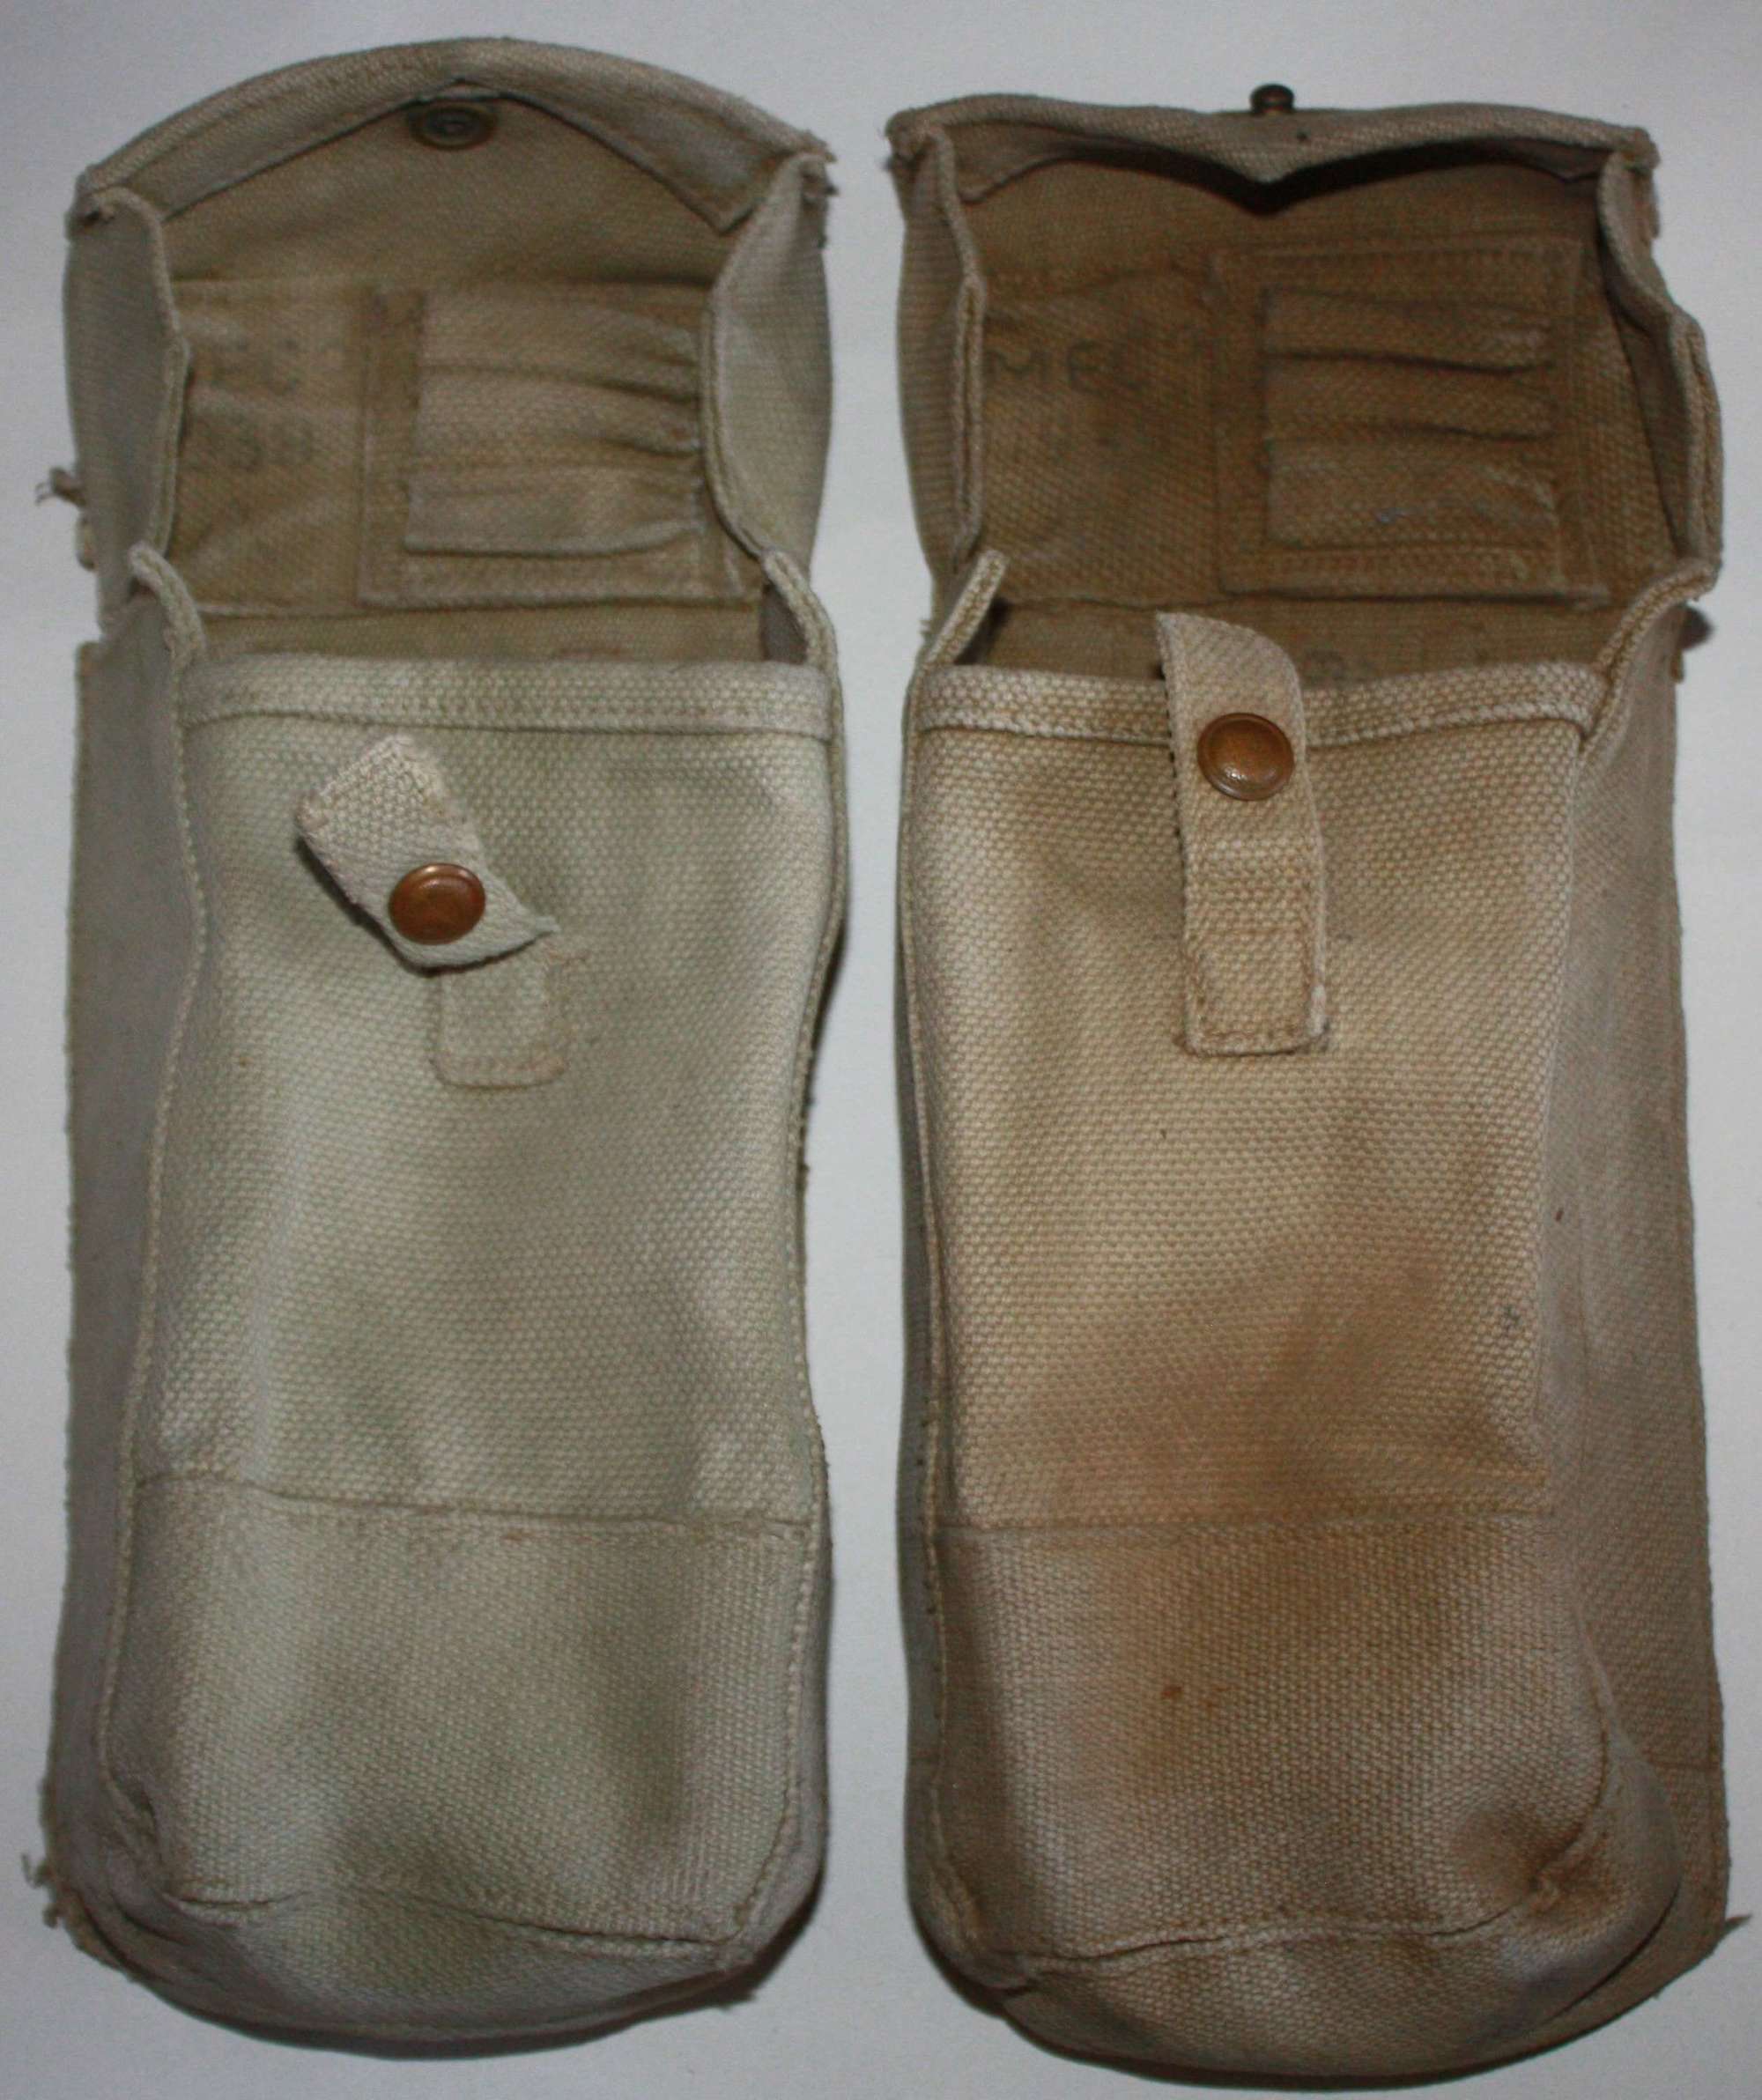 A GOOD USED PRE WWII 37 PATTERN AMMO POUCHES 1938 DATED